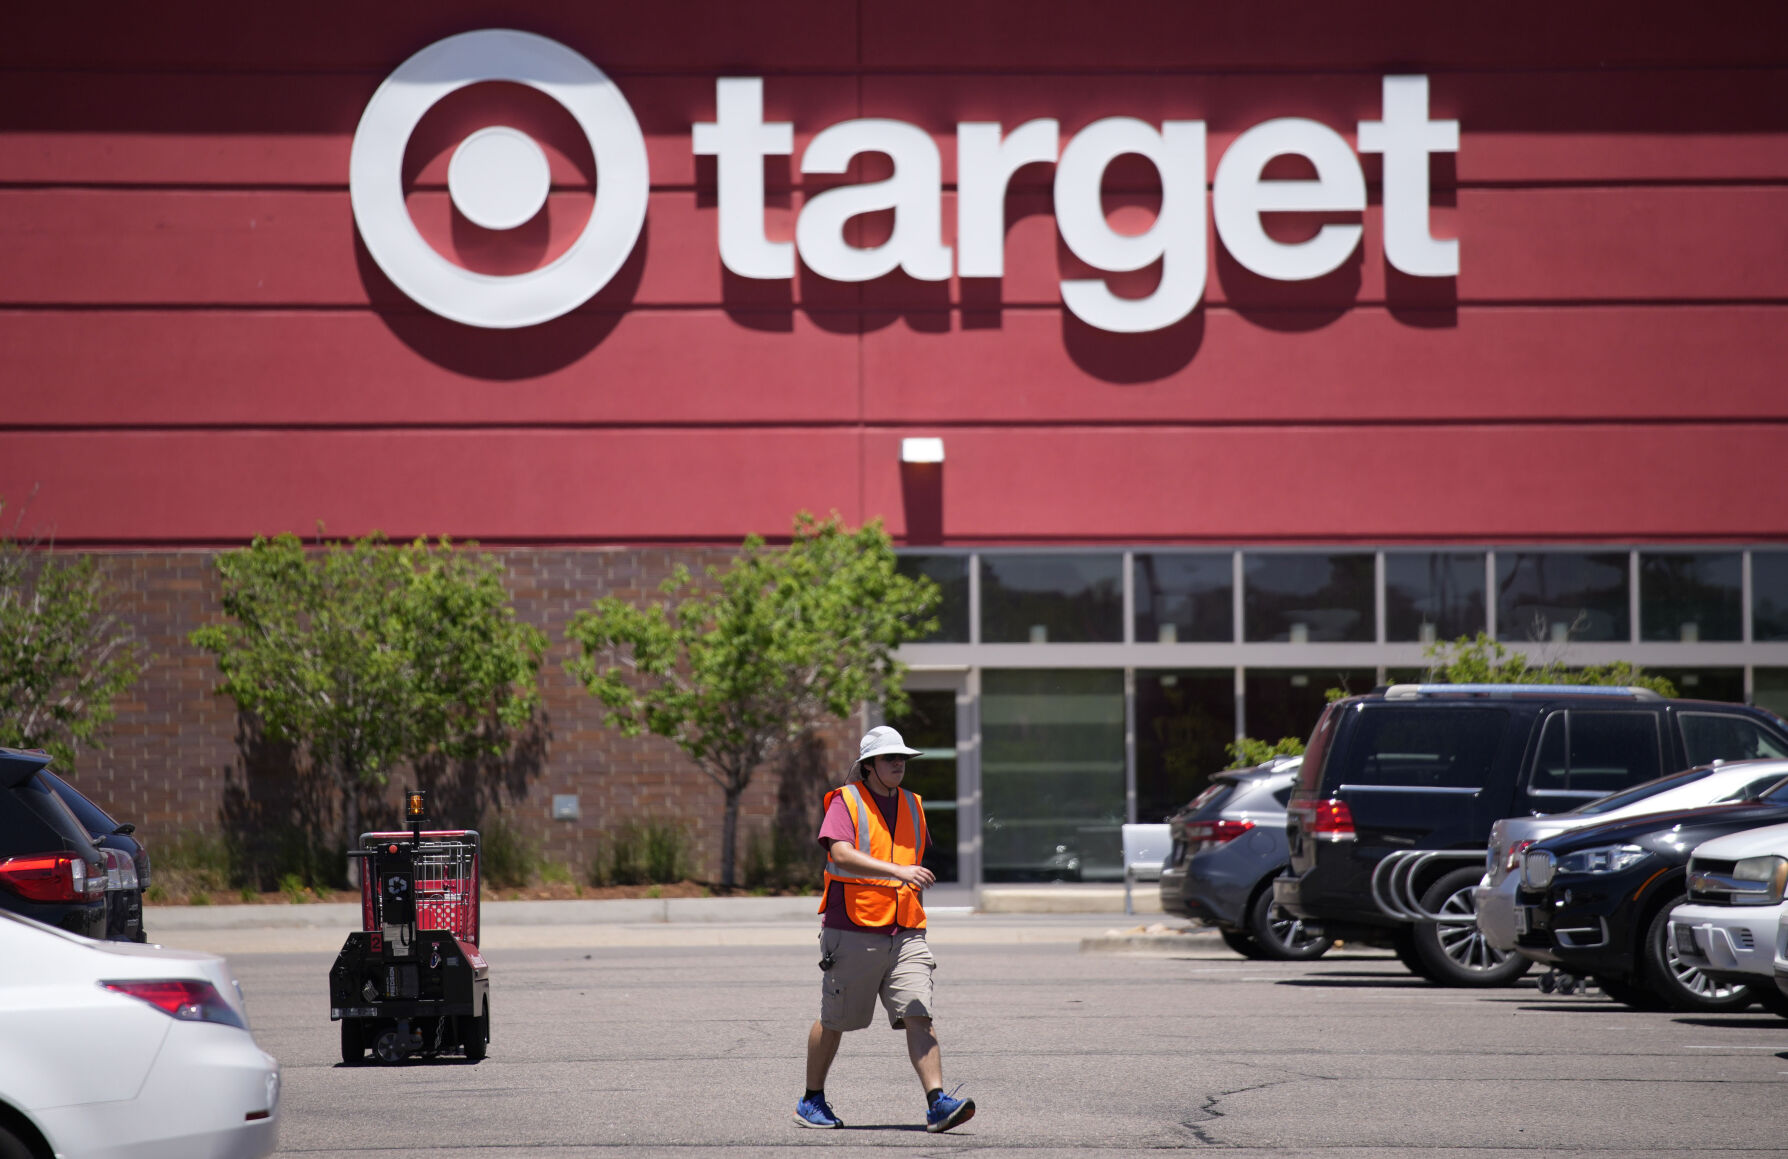 <p>FILE - A worker collects shopping carts in the parking lot of a Target store on June 9, 2021, in Highlands Ranch, Colo. Target is removing certain items from its stores and making other changes to its LGBTQ merchandise nationwide ahead of Pride month, after an intense backlash from some customers including violent confrontations with its workers. (AP Photo/David Zalubowski, File)</p>   PHOTO CREDIT: David Zalubowski 